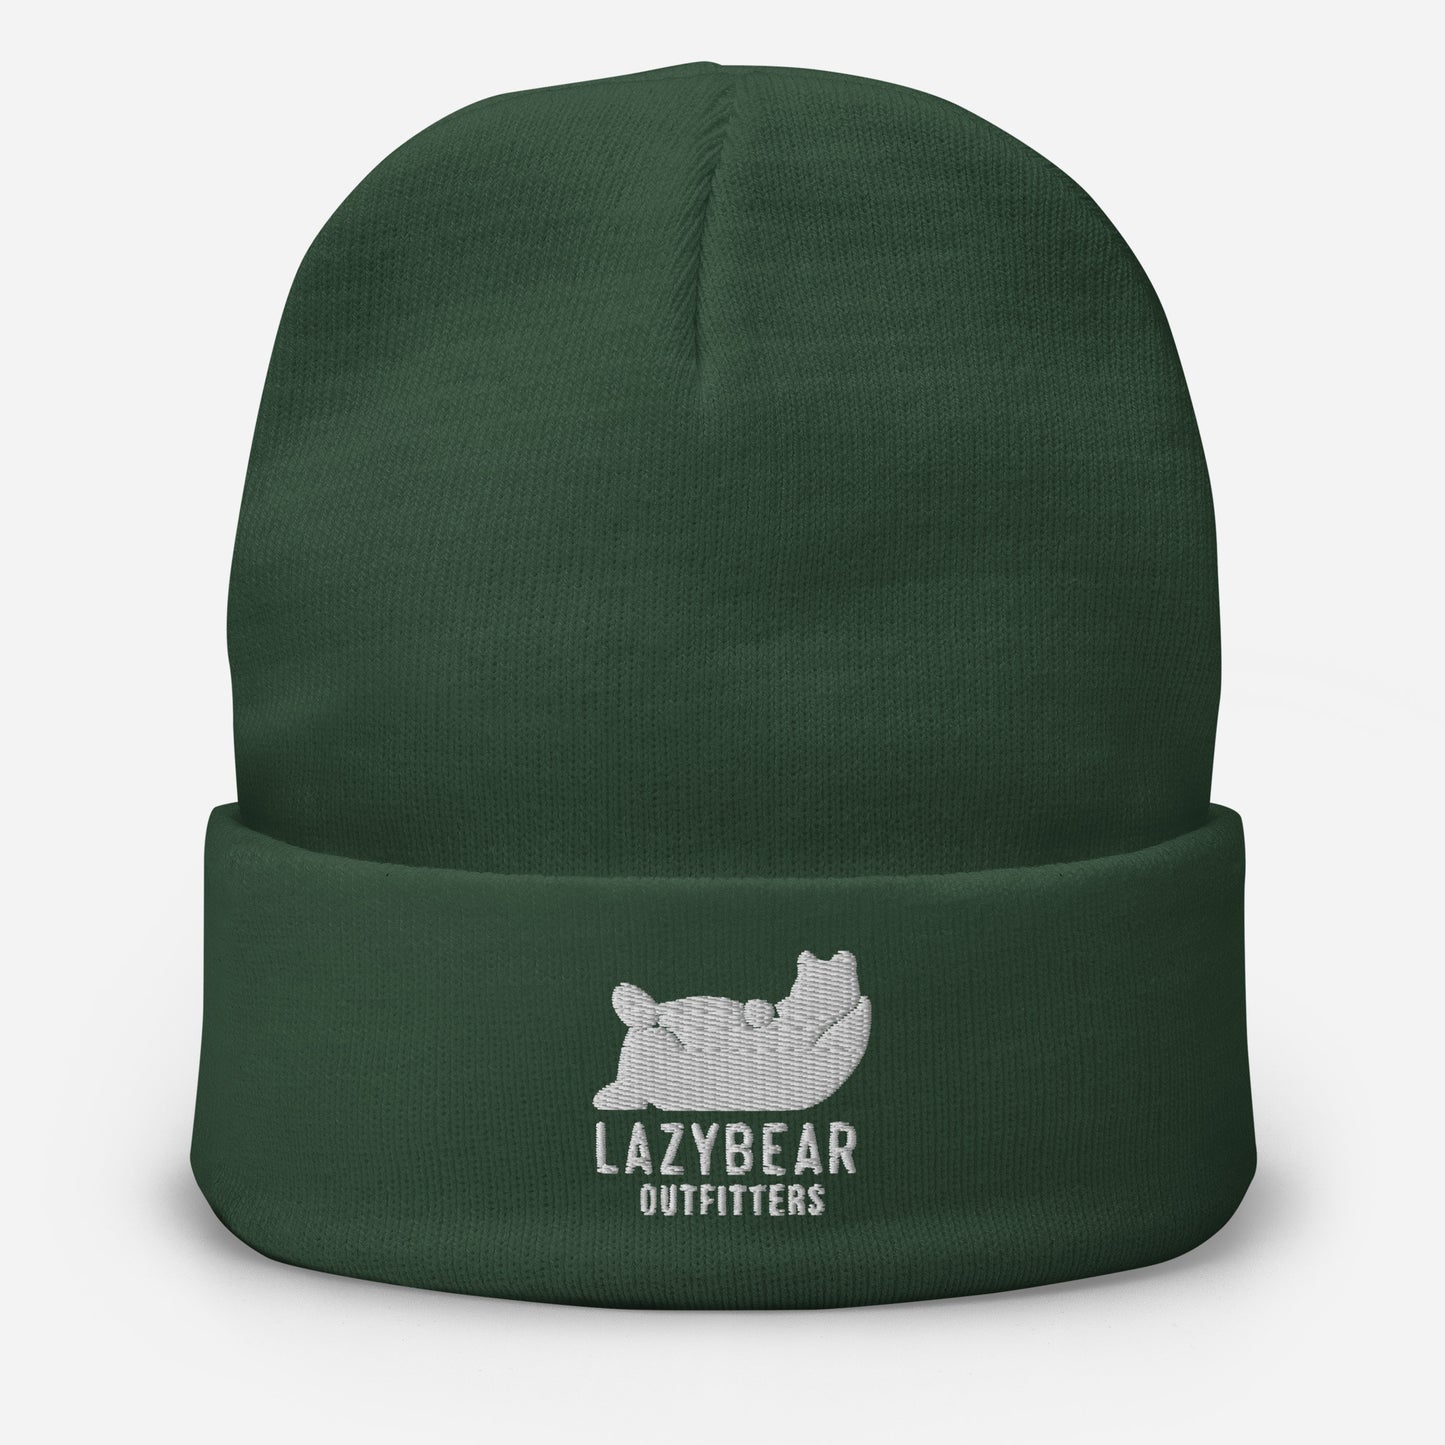 Lazy Bear Outfitters' Beanie